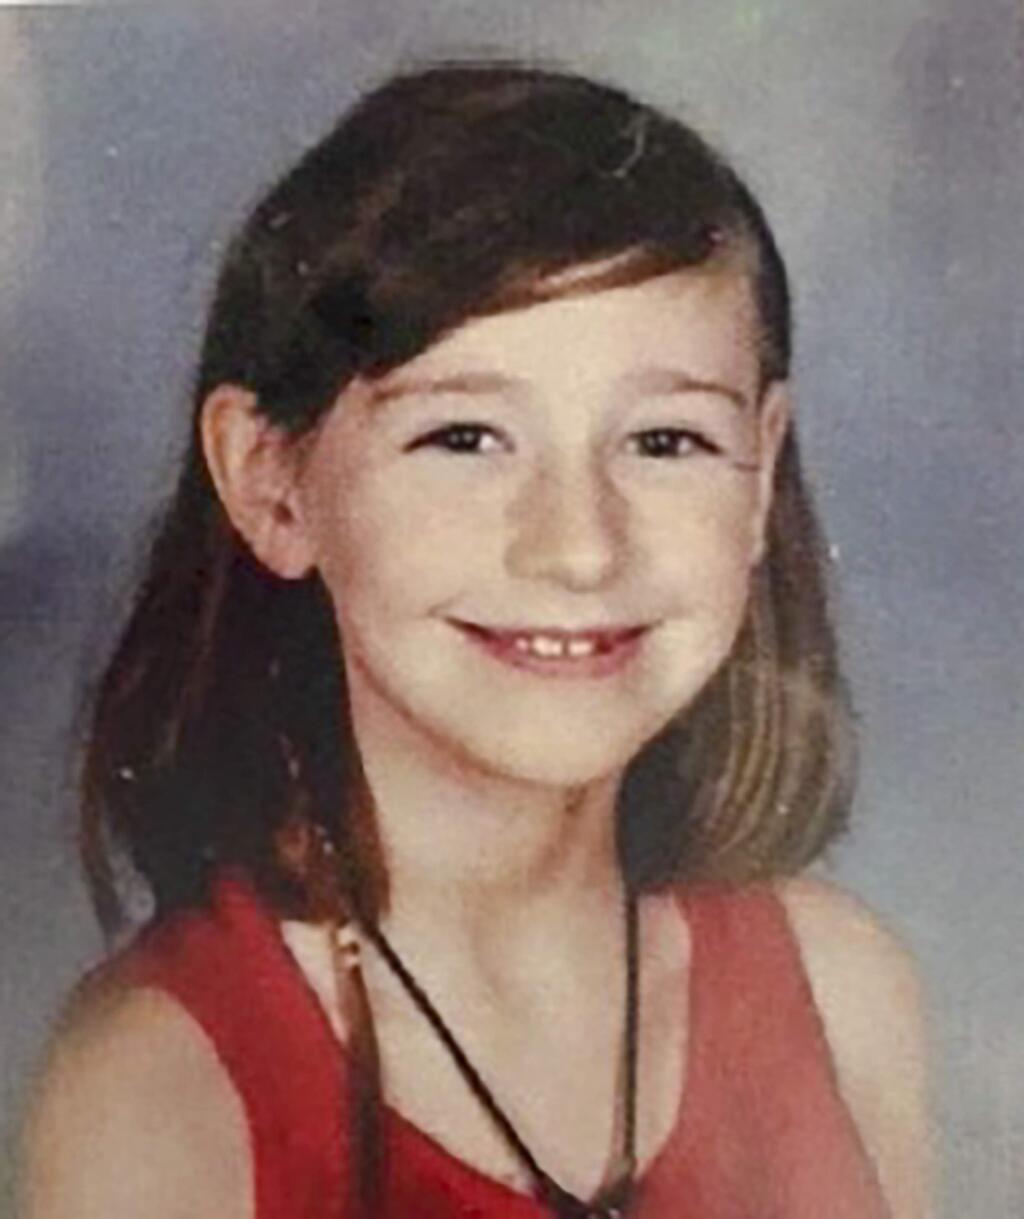 In this undated photo released by the Santa Cruz Police Department, shows missing Madyson 'Maddy' Middleton, from Santa Cruz, Calif. Madyson Middleton was last seen Sunday afternoon, July 26, 2015, riding a scooter outside the Tannery Arts Center in Santa Cruz, a beach town along the Northern California coast. (Santa Cruz Police Department via AP)